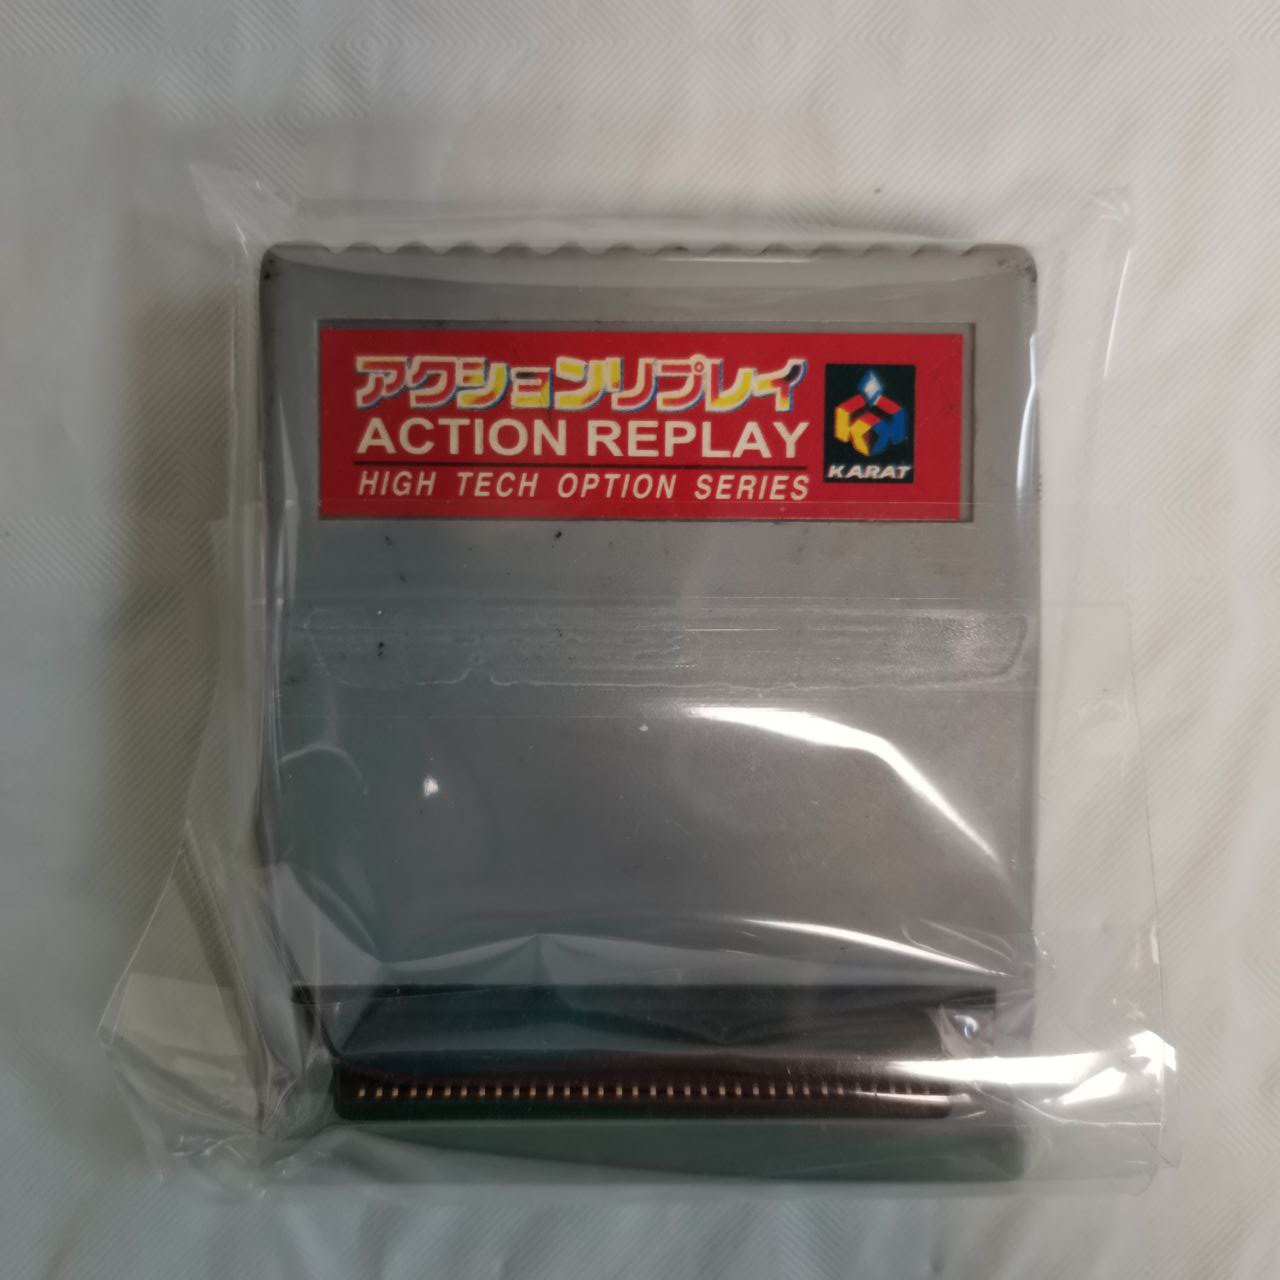 ACTION REPLAY (PSX)